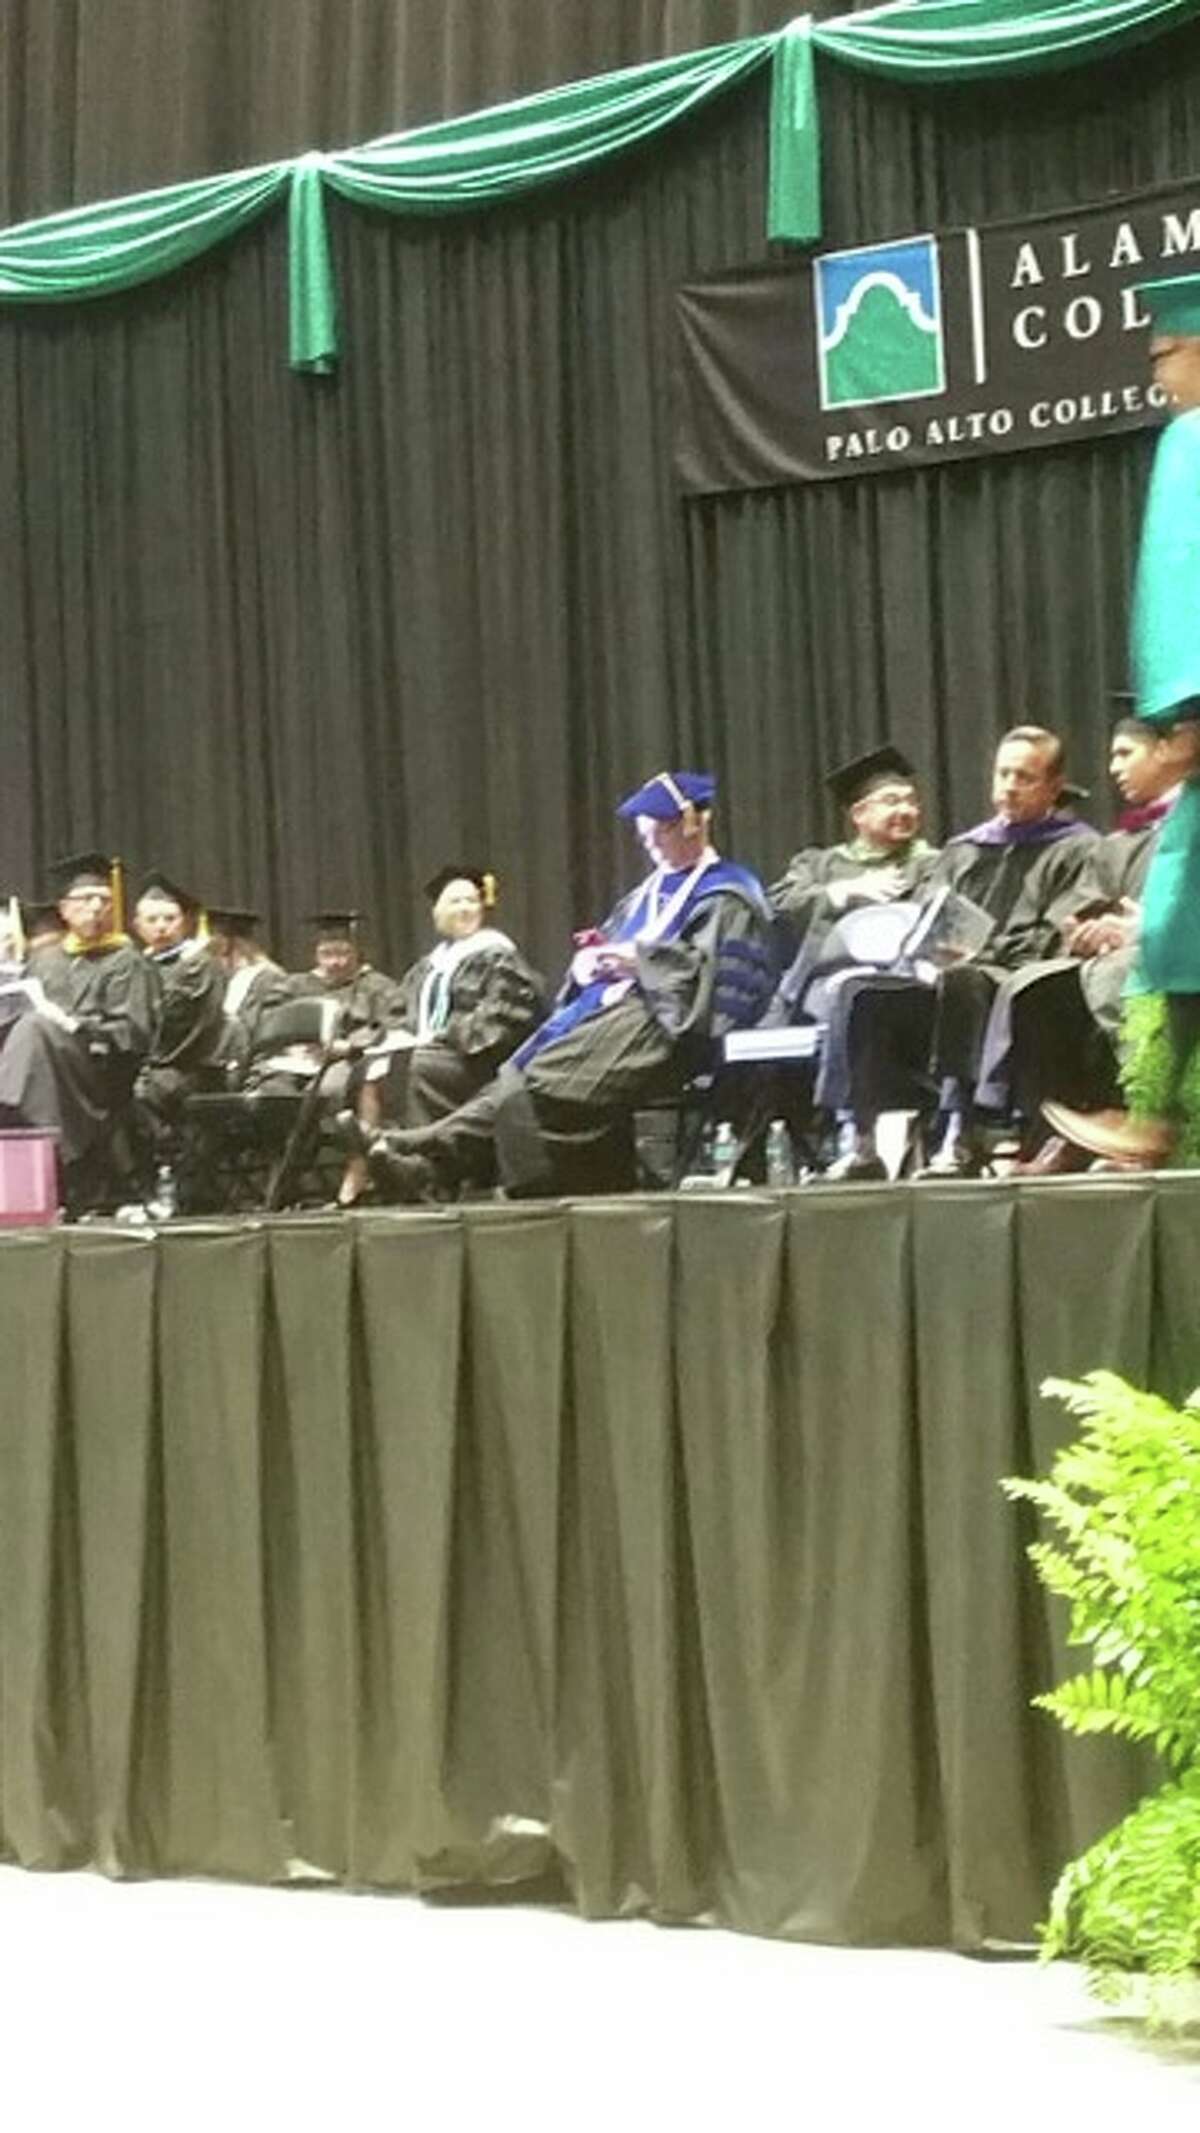 Alamo Colleges Chancellor Bruce Leslie is shown on his phone during Palo Alto College's commencement ceremony on May 21, 2016 at Freeman Coliseum.